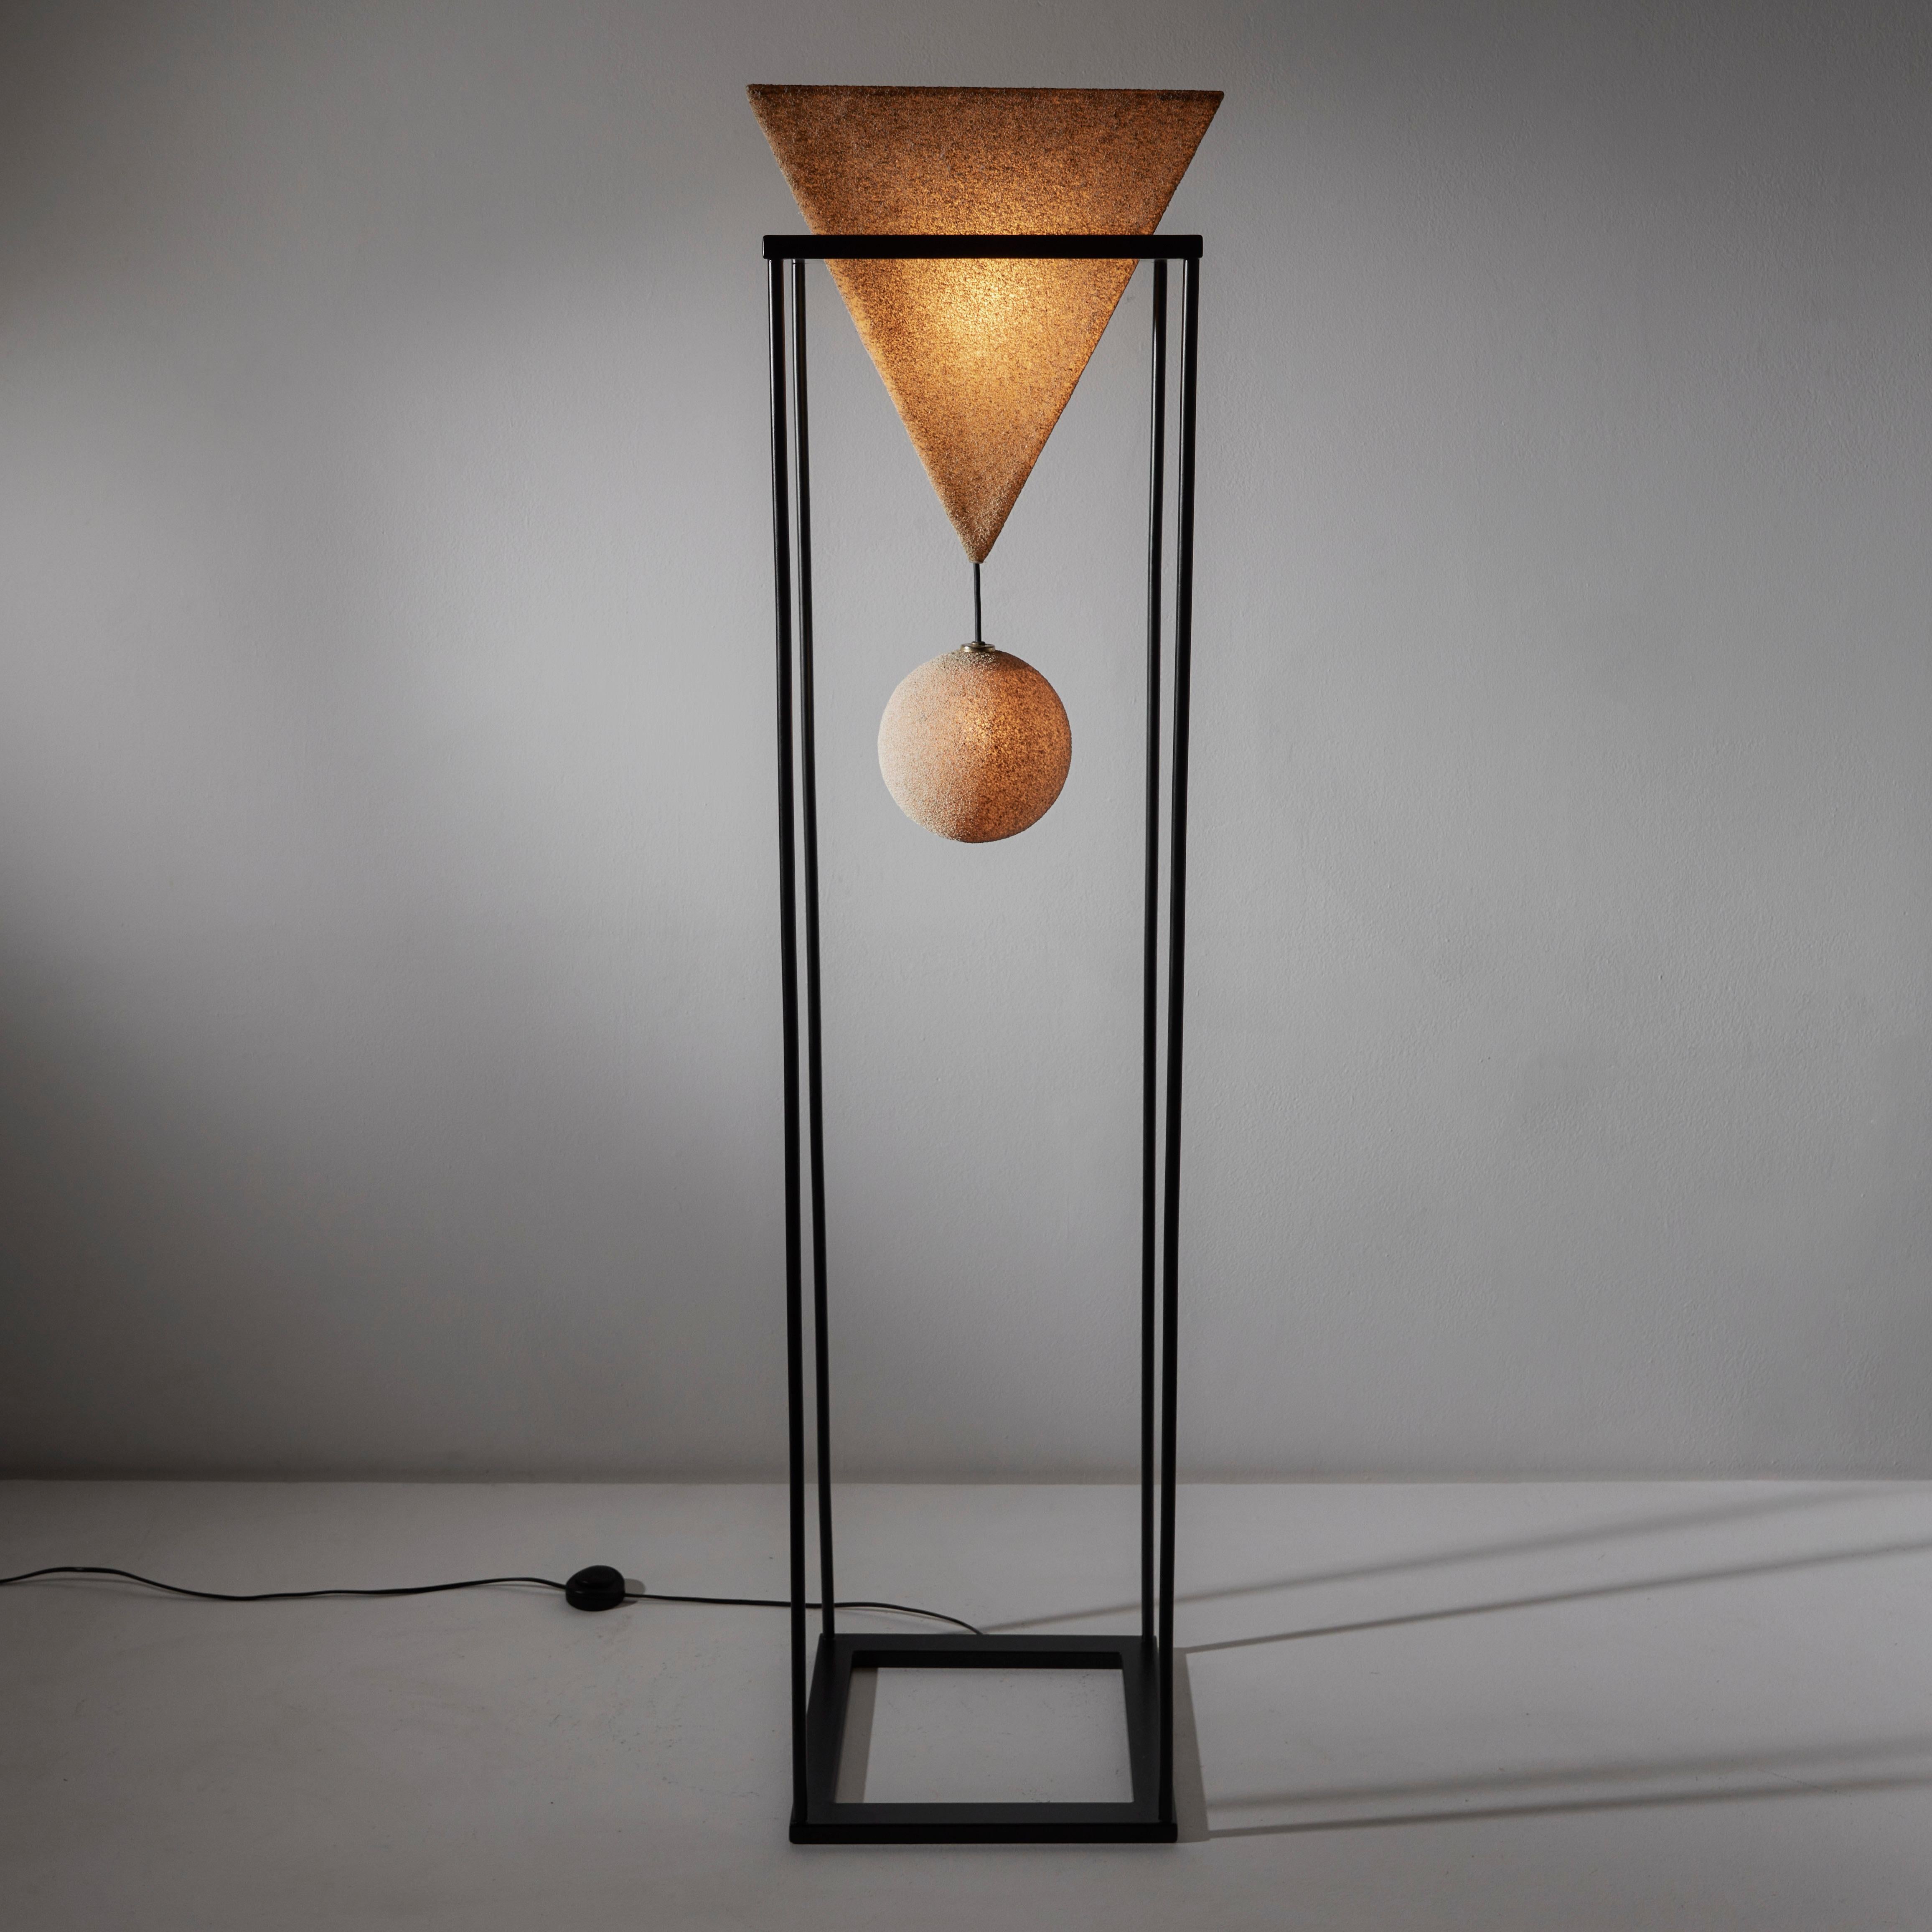 Enameled Floor Lamp by Luciano Sartini for Singleton